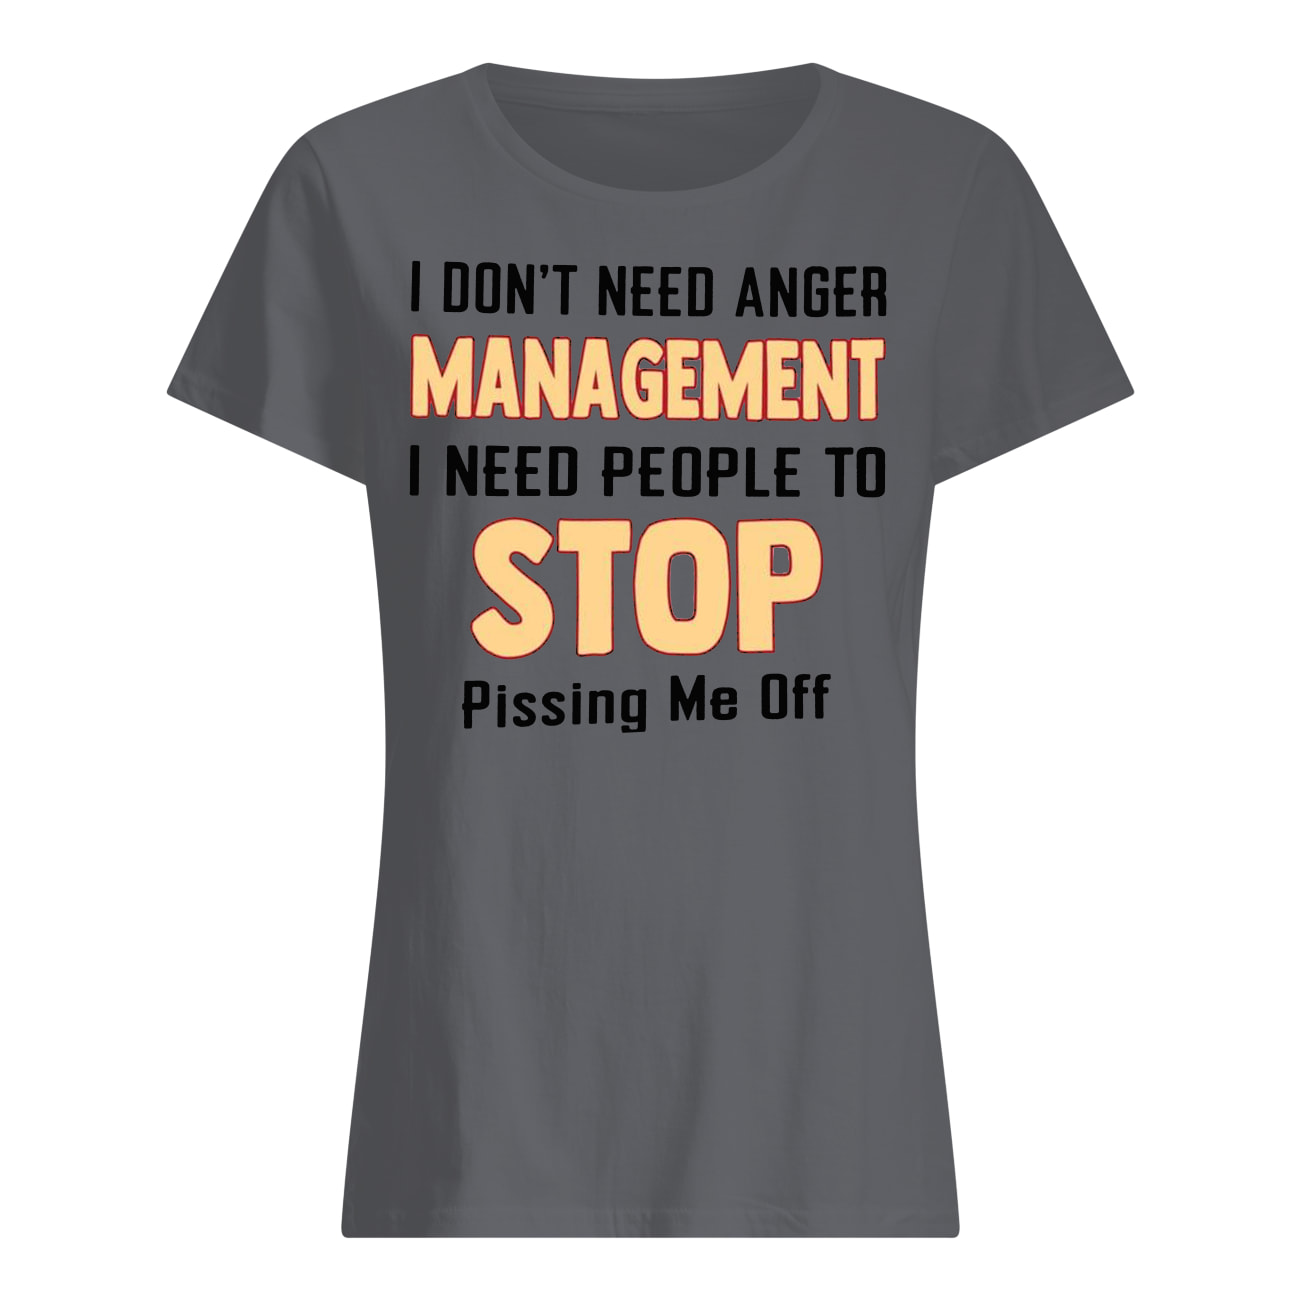 I don't need anger management I need people to stop pissing me off women's shirt